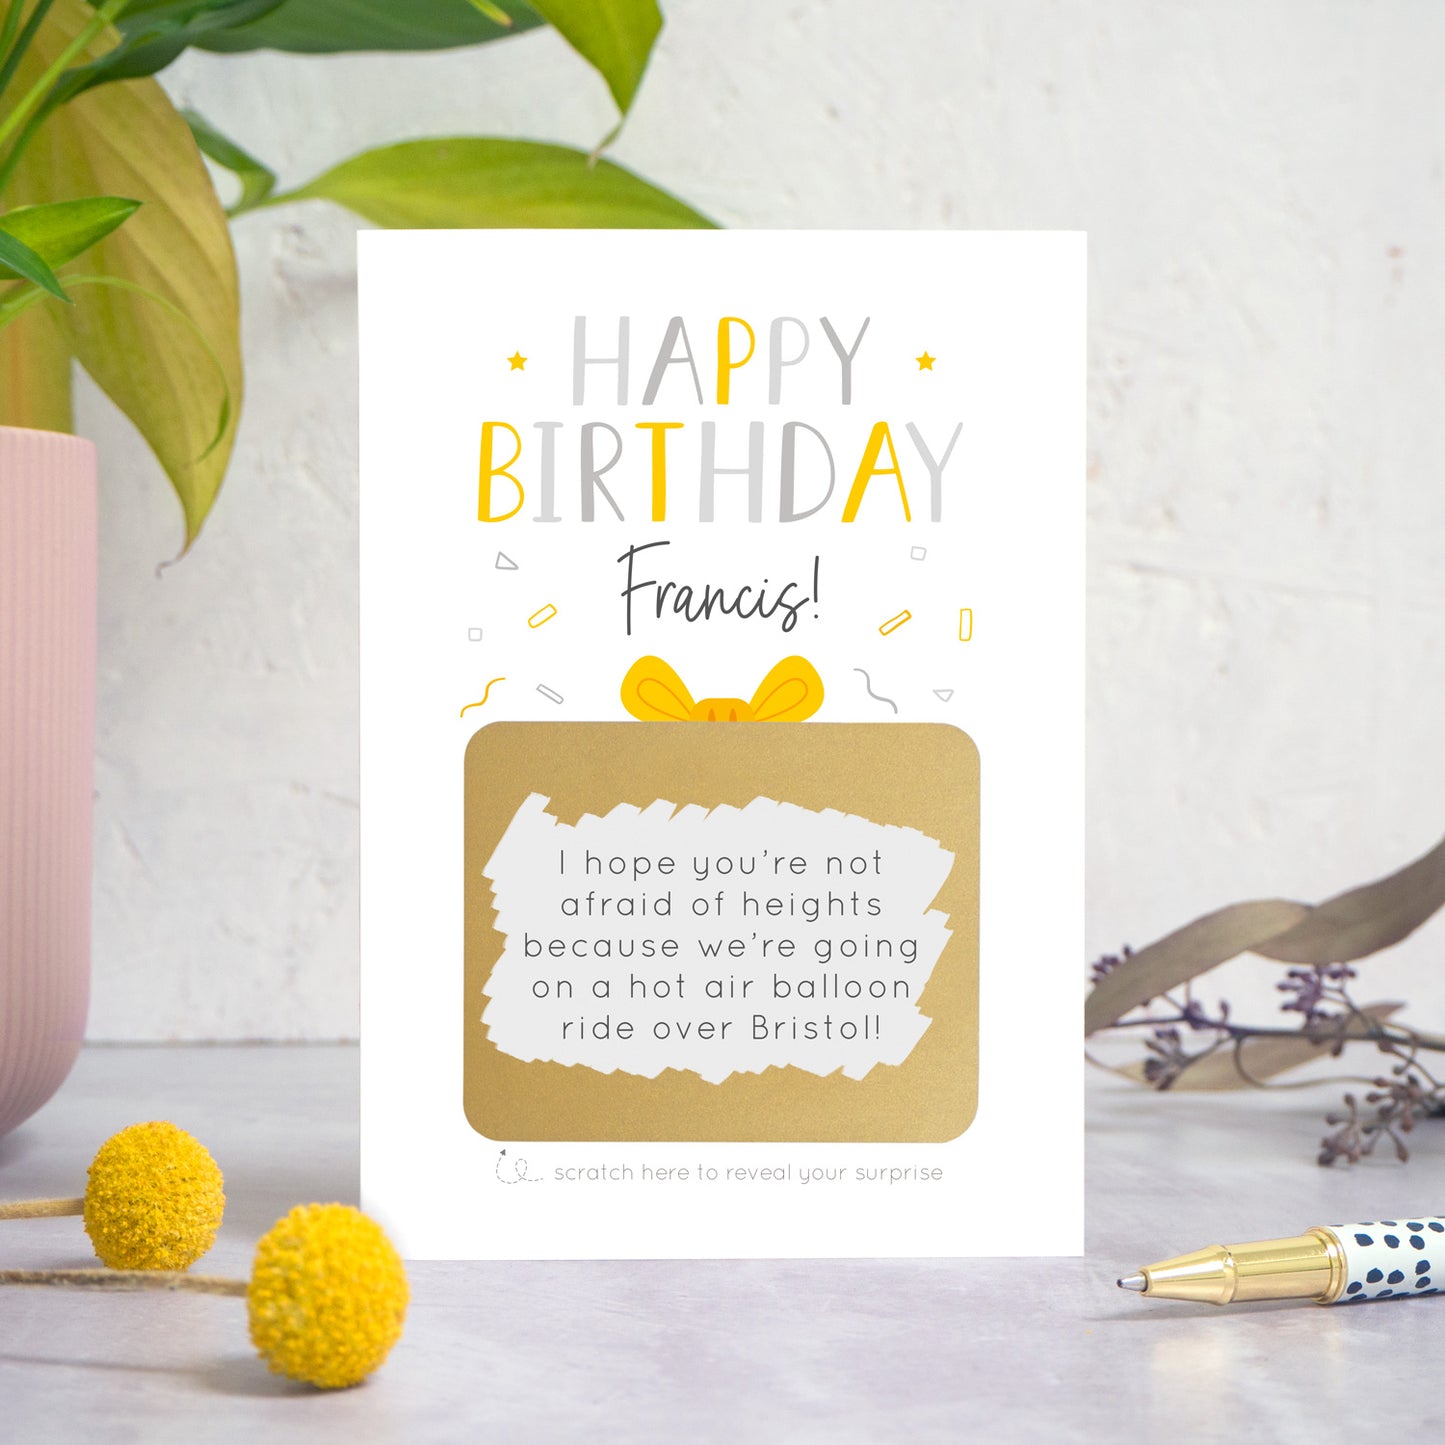 A personalised happy birthday scratch card in yellow and grey that has been photographed on a white and grey background with foliage and a pen in both the foreground and background. The card features the recipients name and a scratch panel that has been scratched off revealing a personalised message.